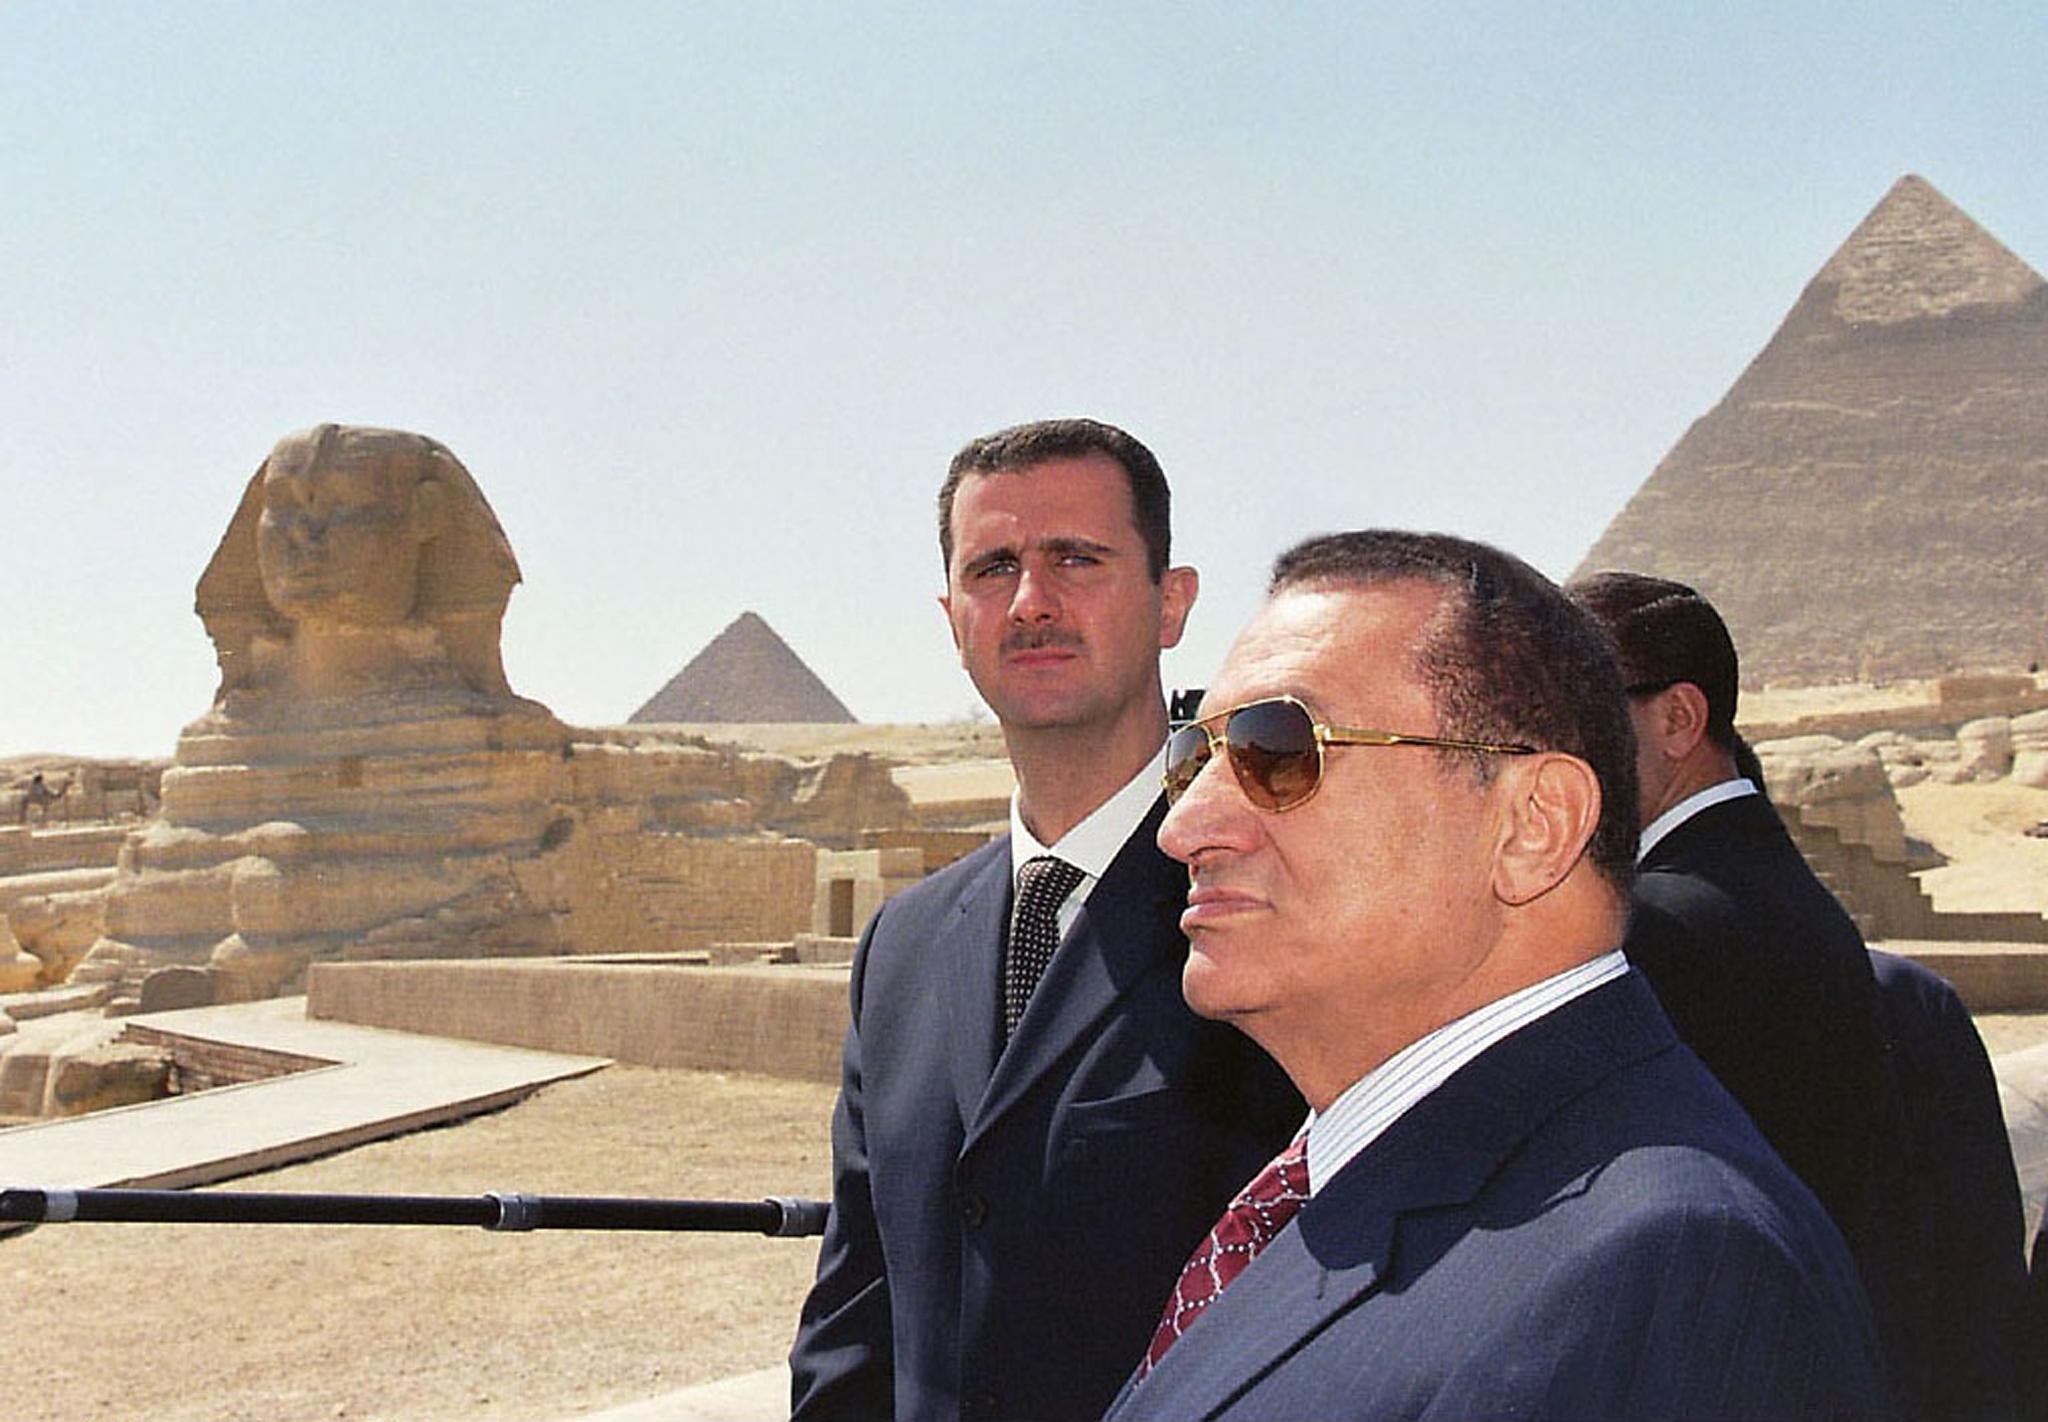 Syrian president Bashar al-Assad (left) visiting the pyramids in Giza with his Egyptian counterpart Hosni Mubarak, in 2002 (AFP/Getty)